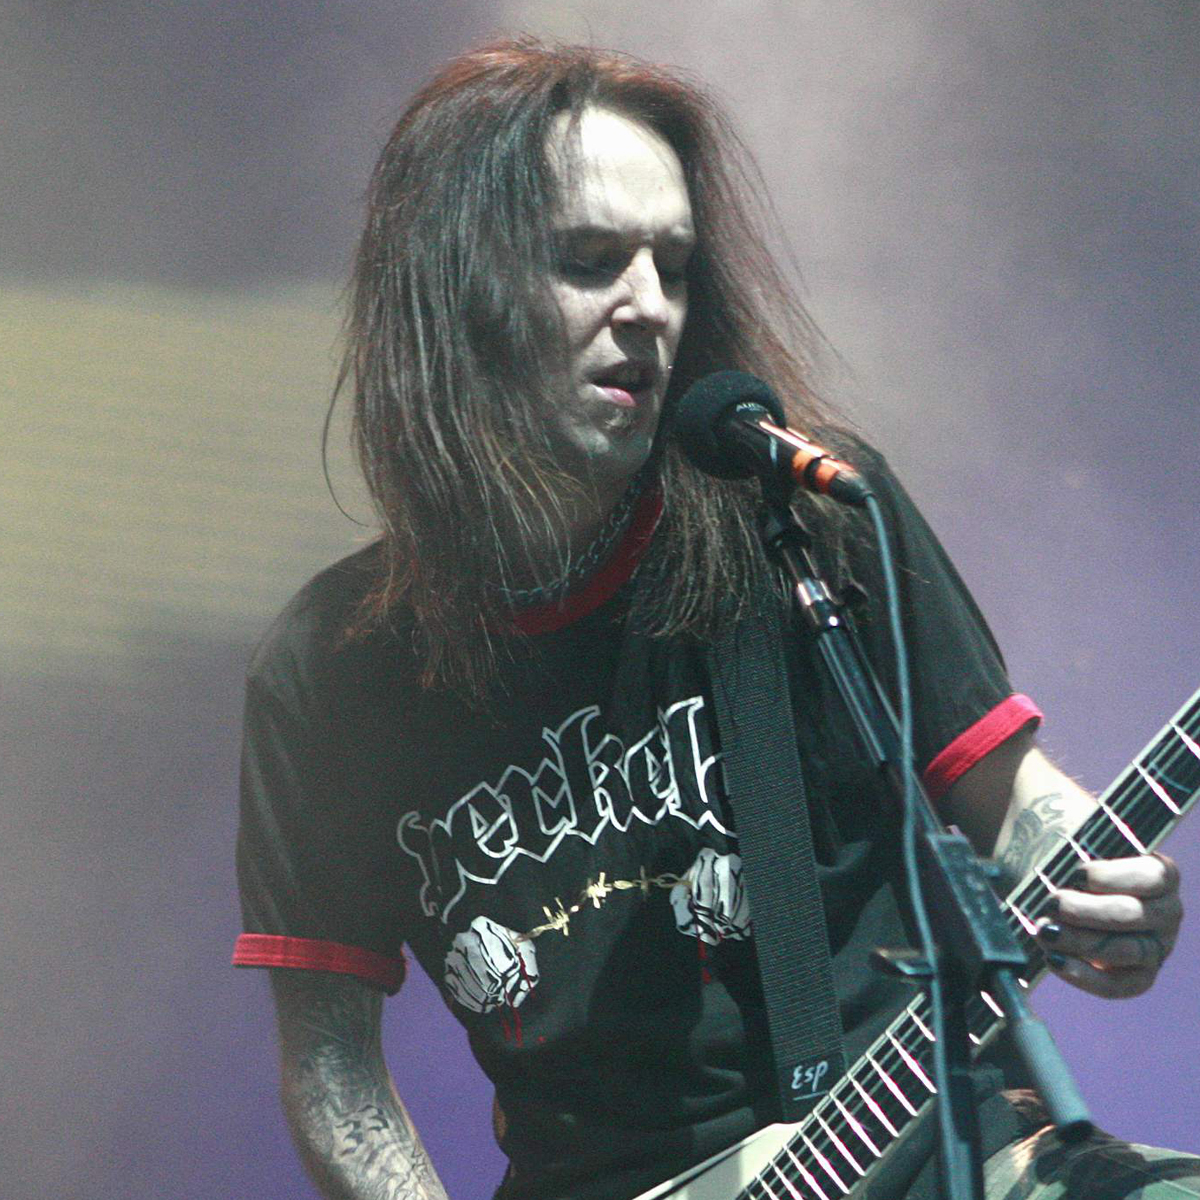 Rockers Mourn the Death of Children of Bodom's Alexi Laiho